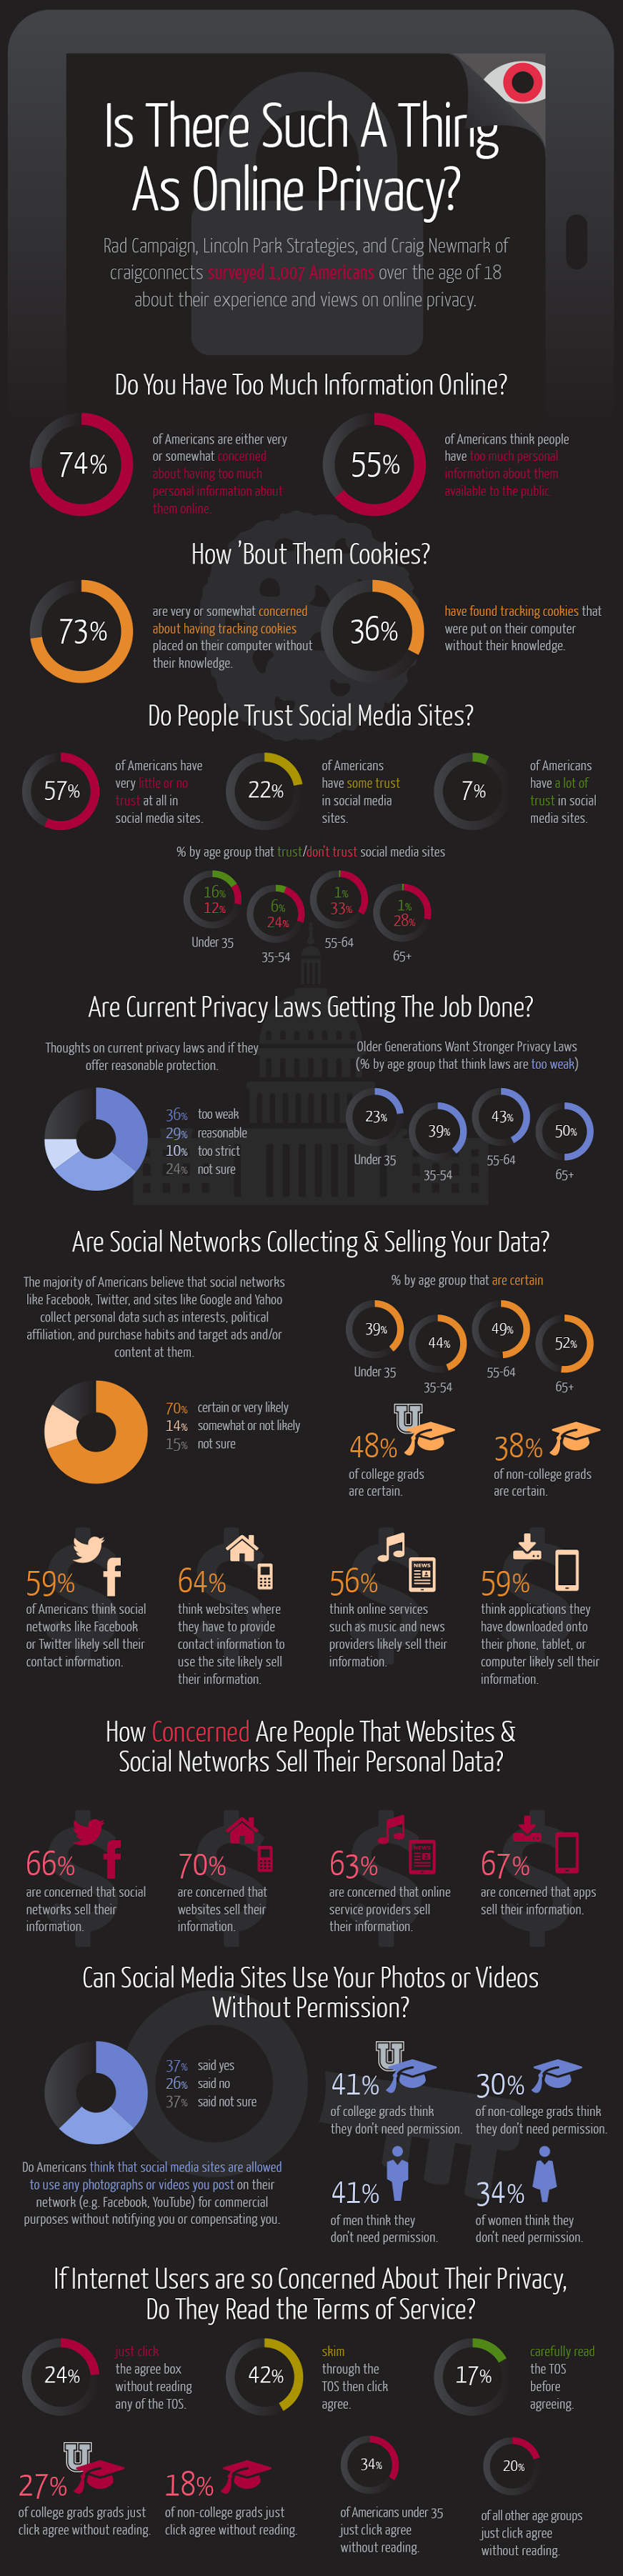 Is there such a thing as web privacy? #infographic